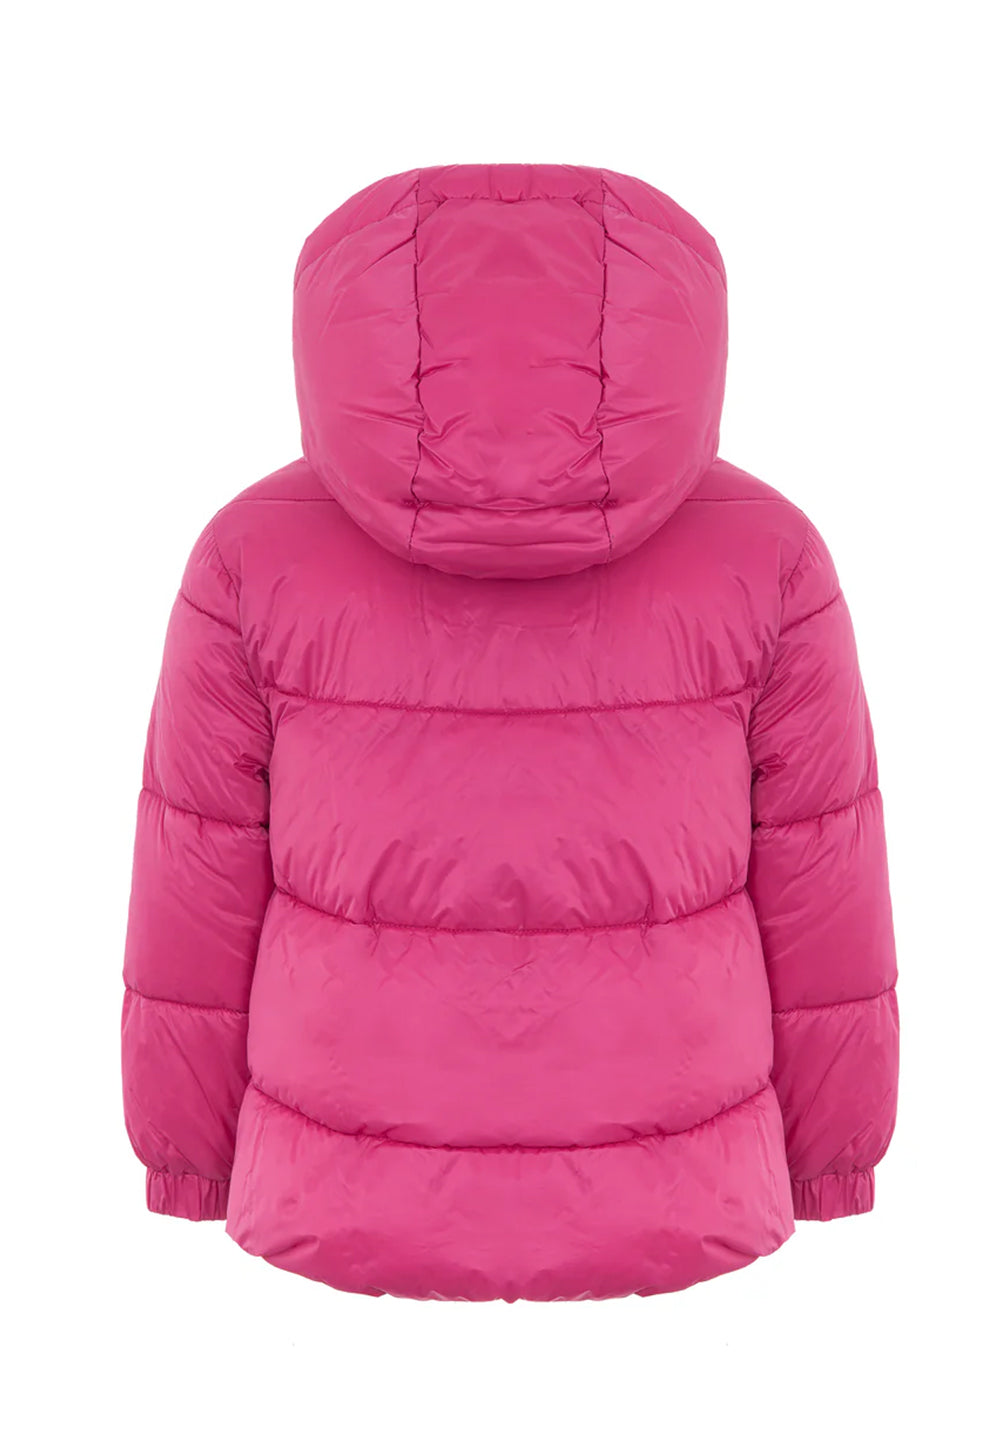 Fluorescent pink jacket for baby girls